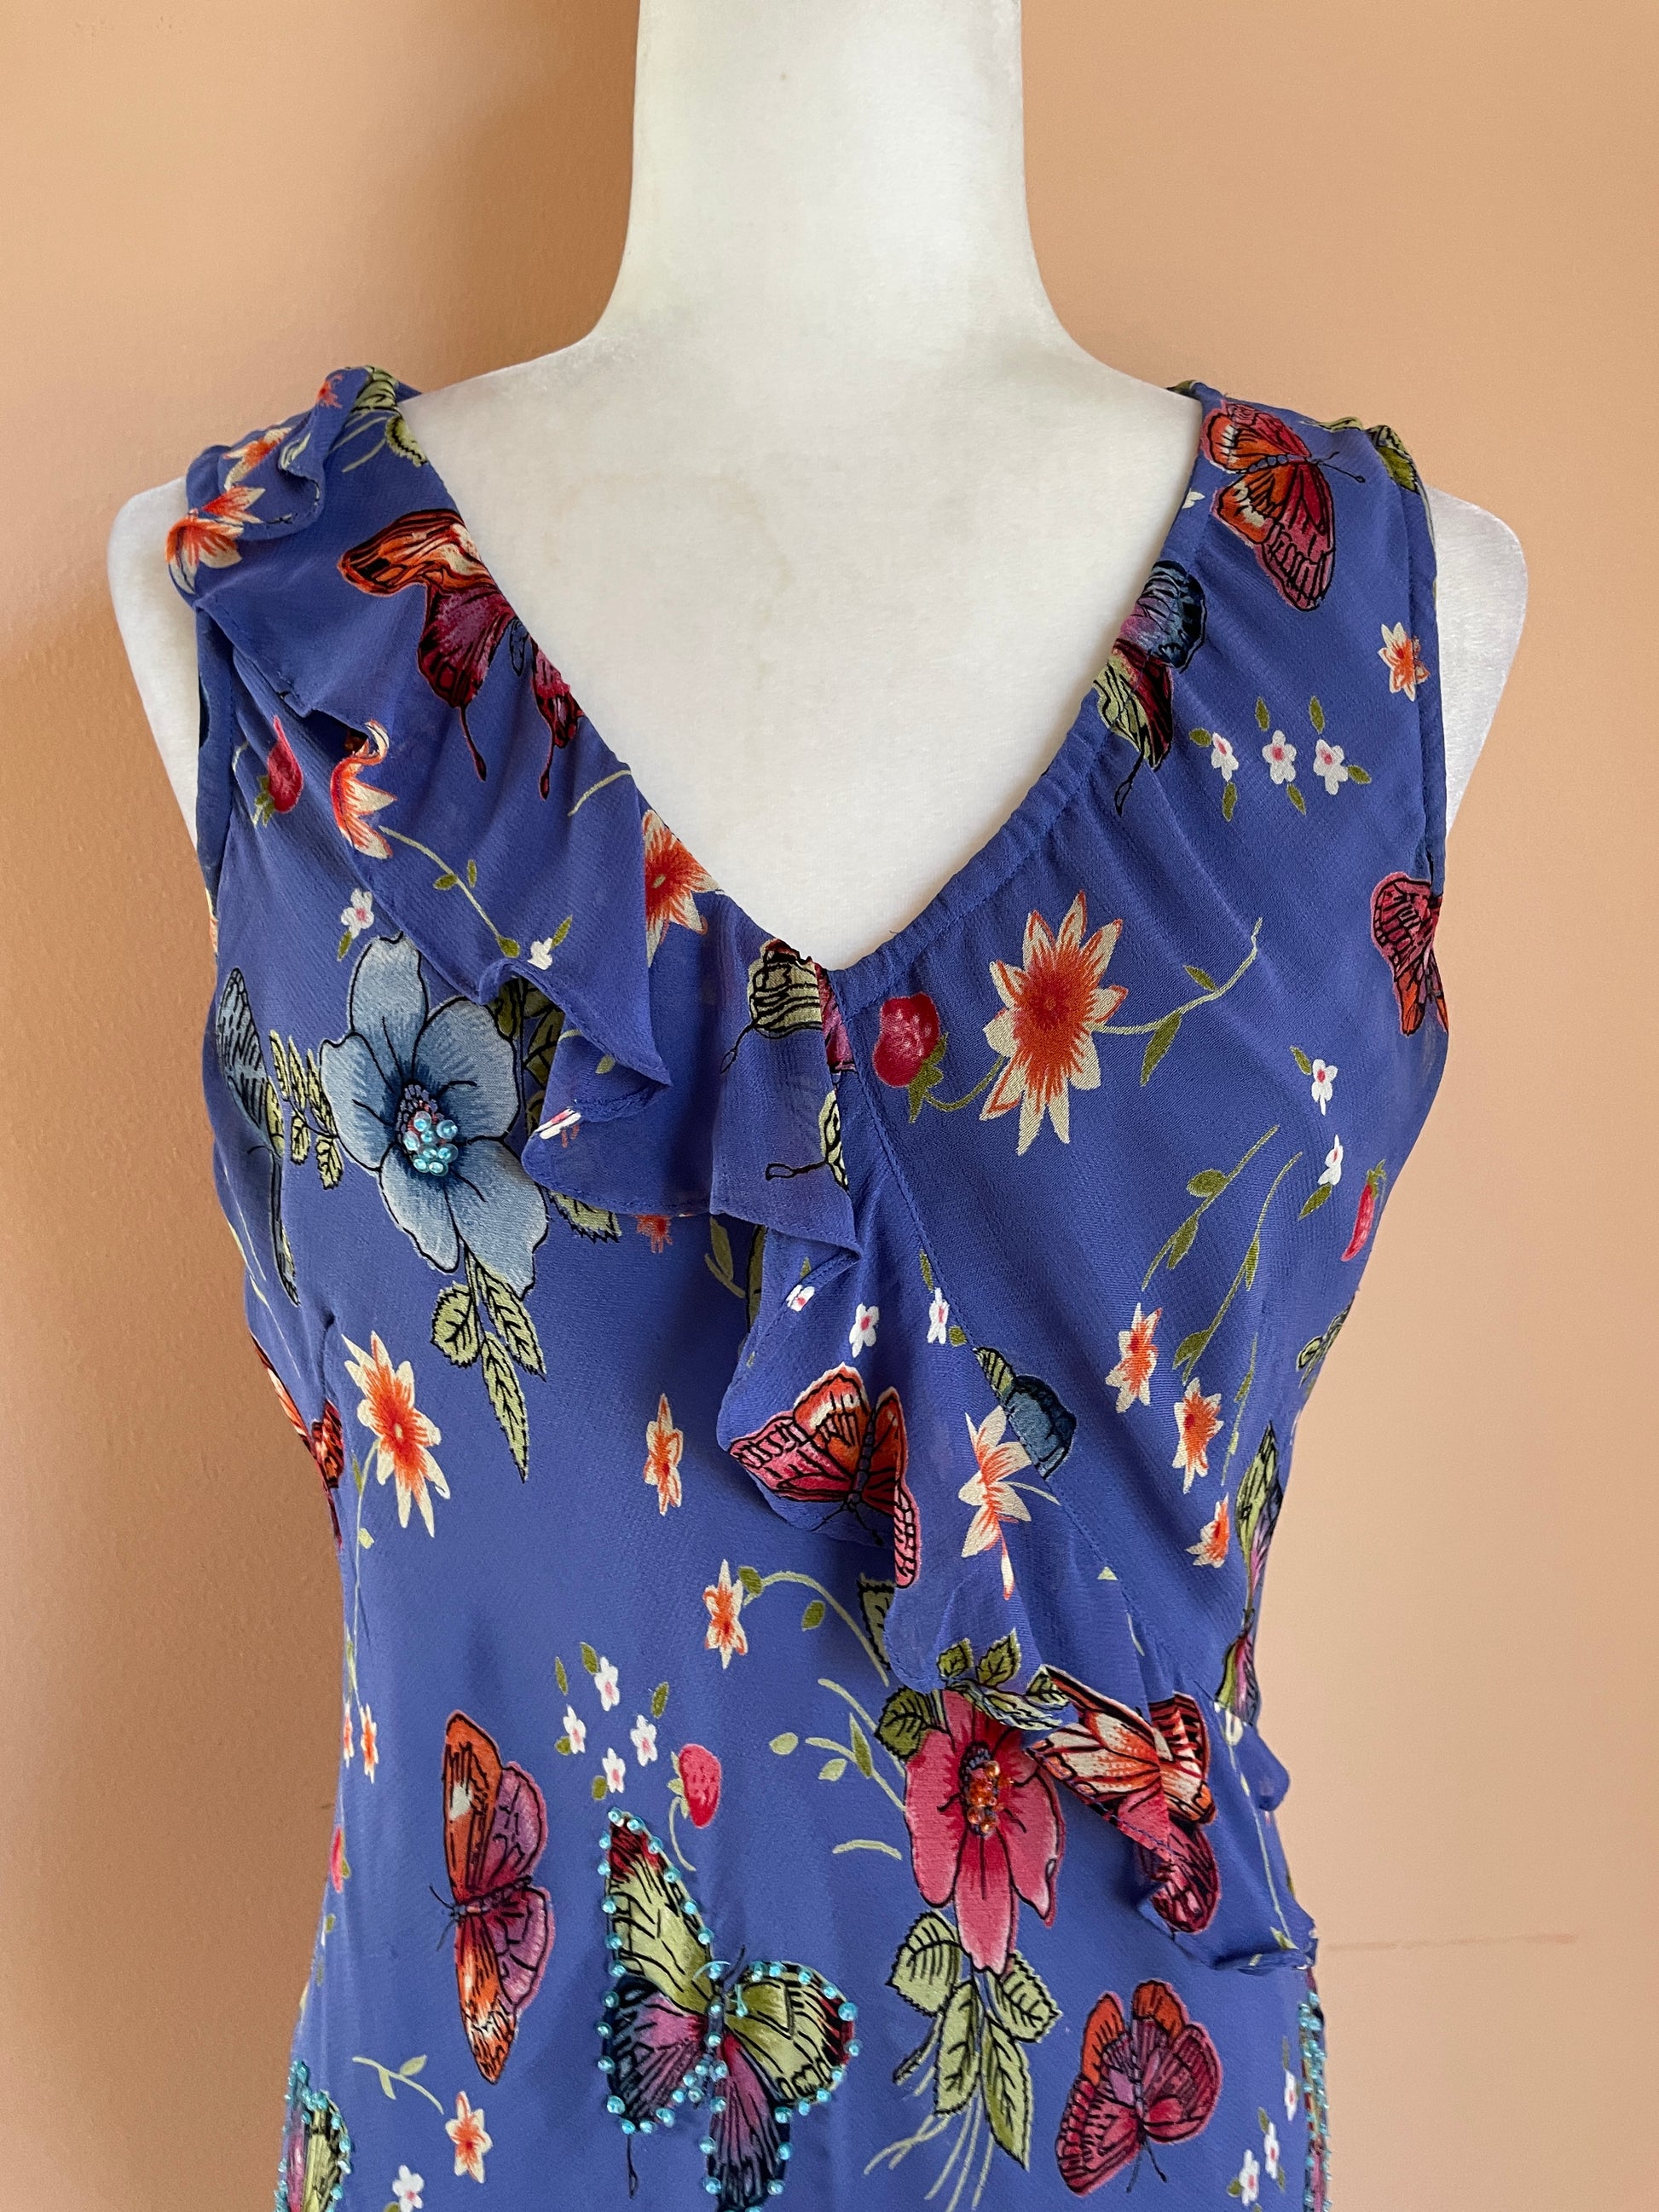  Vintage 90s Lola P Blue Beaded Butterfly Floral Print Summer Garden Party Silk Rayon Blend Ruffle Sleeveless Long Draped Bodycon Dress M